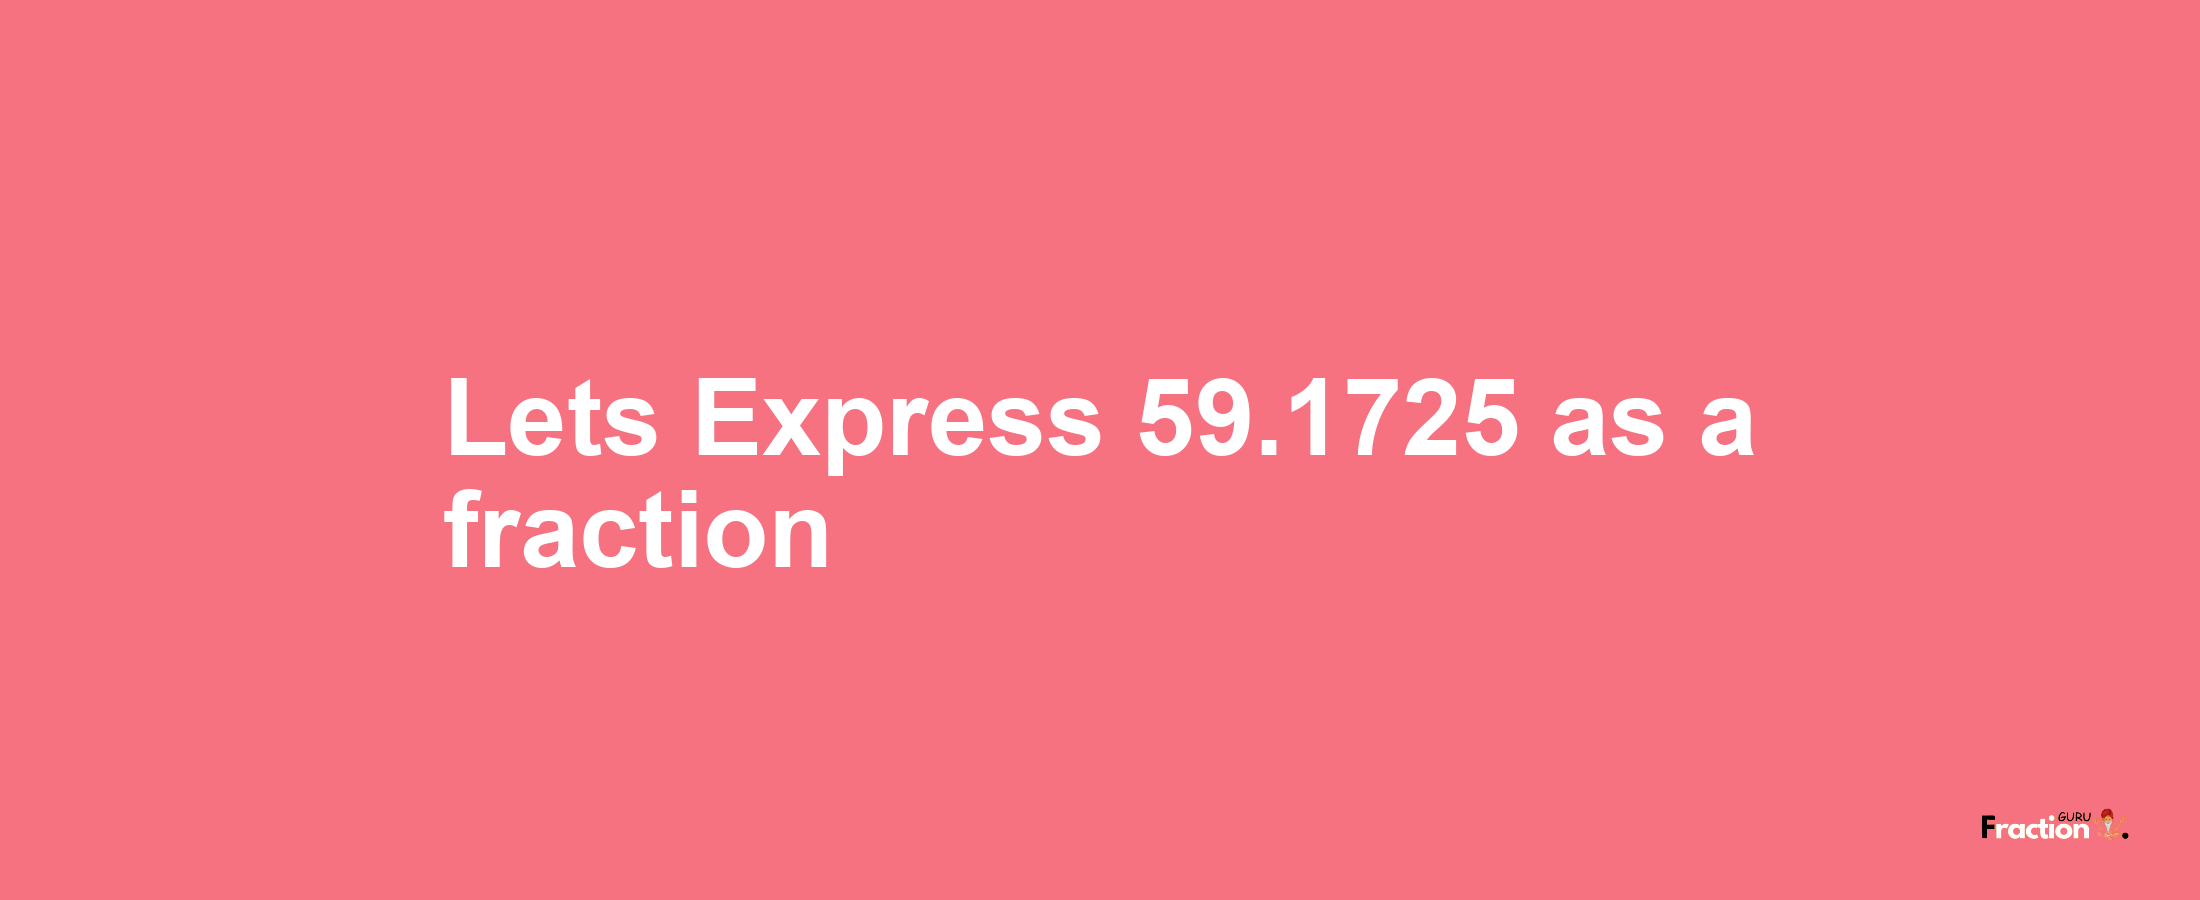 Lets Express 59.1725 as afraction